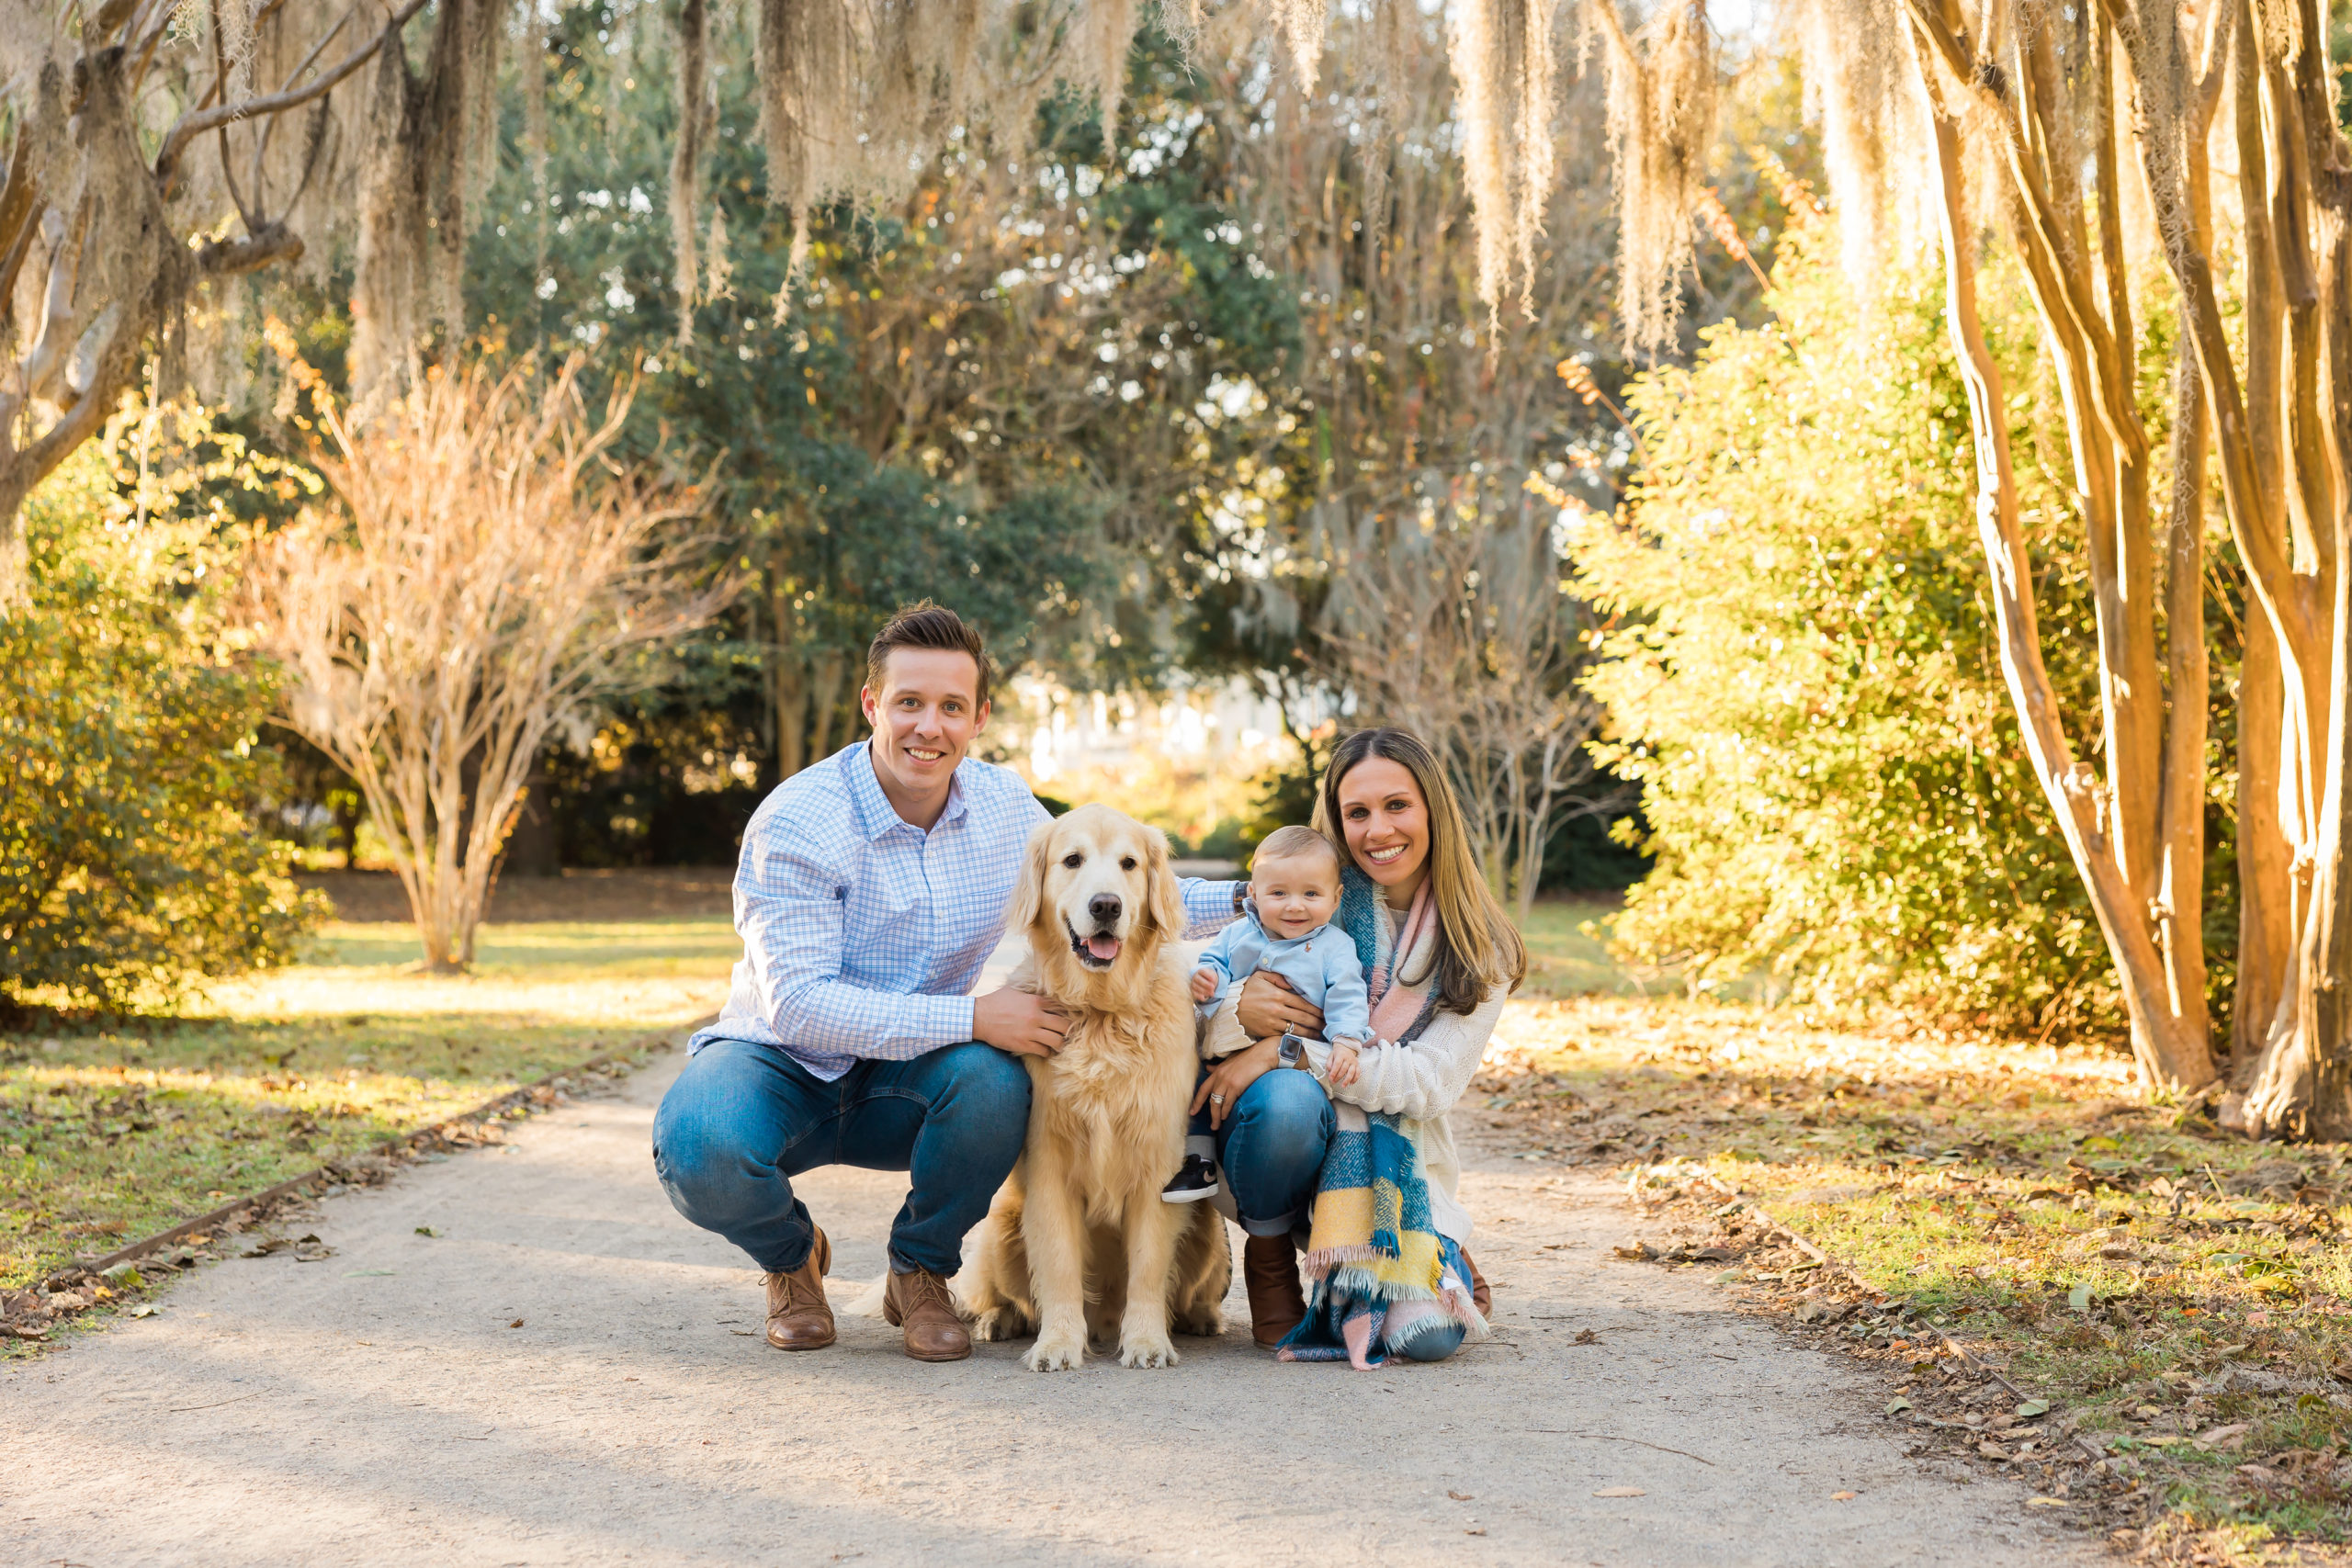 Charleston Family photographer shares tips on bringing your dogs to your photoshoot